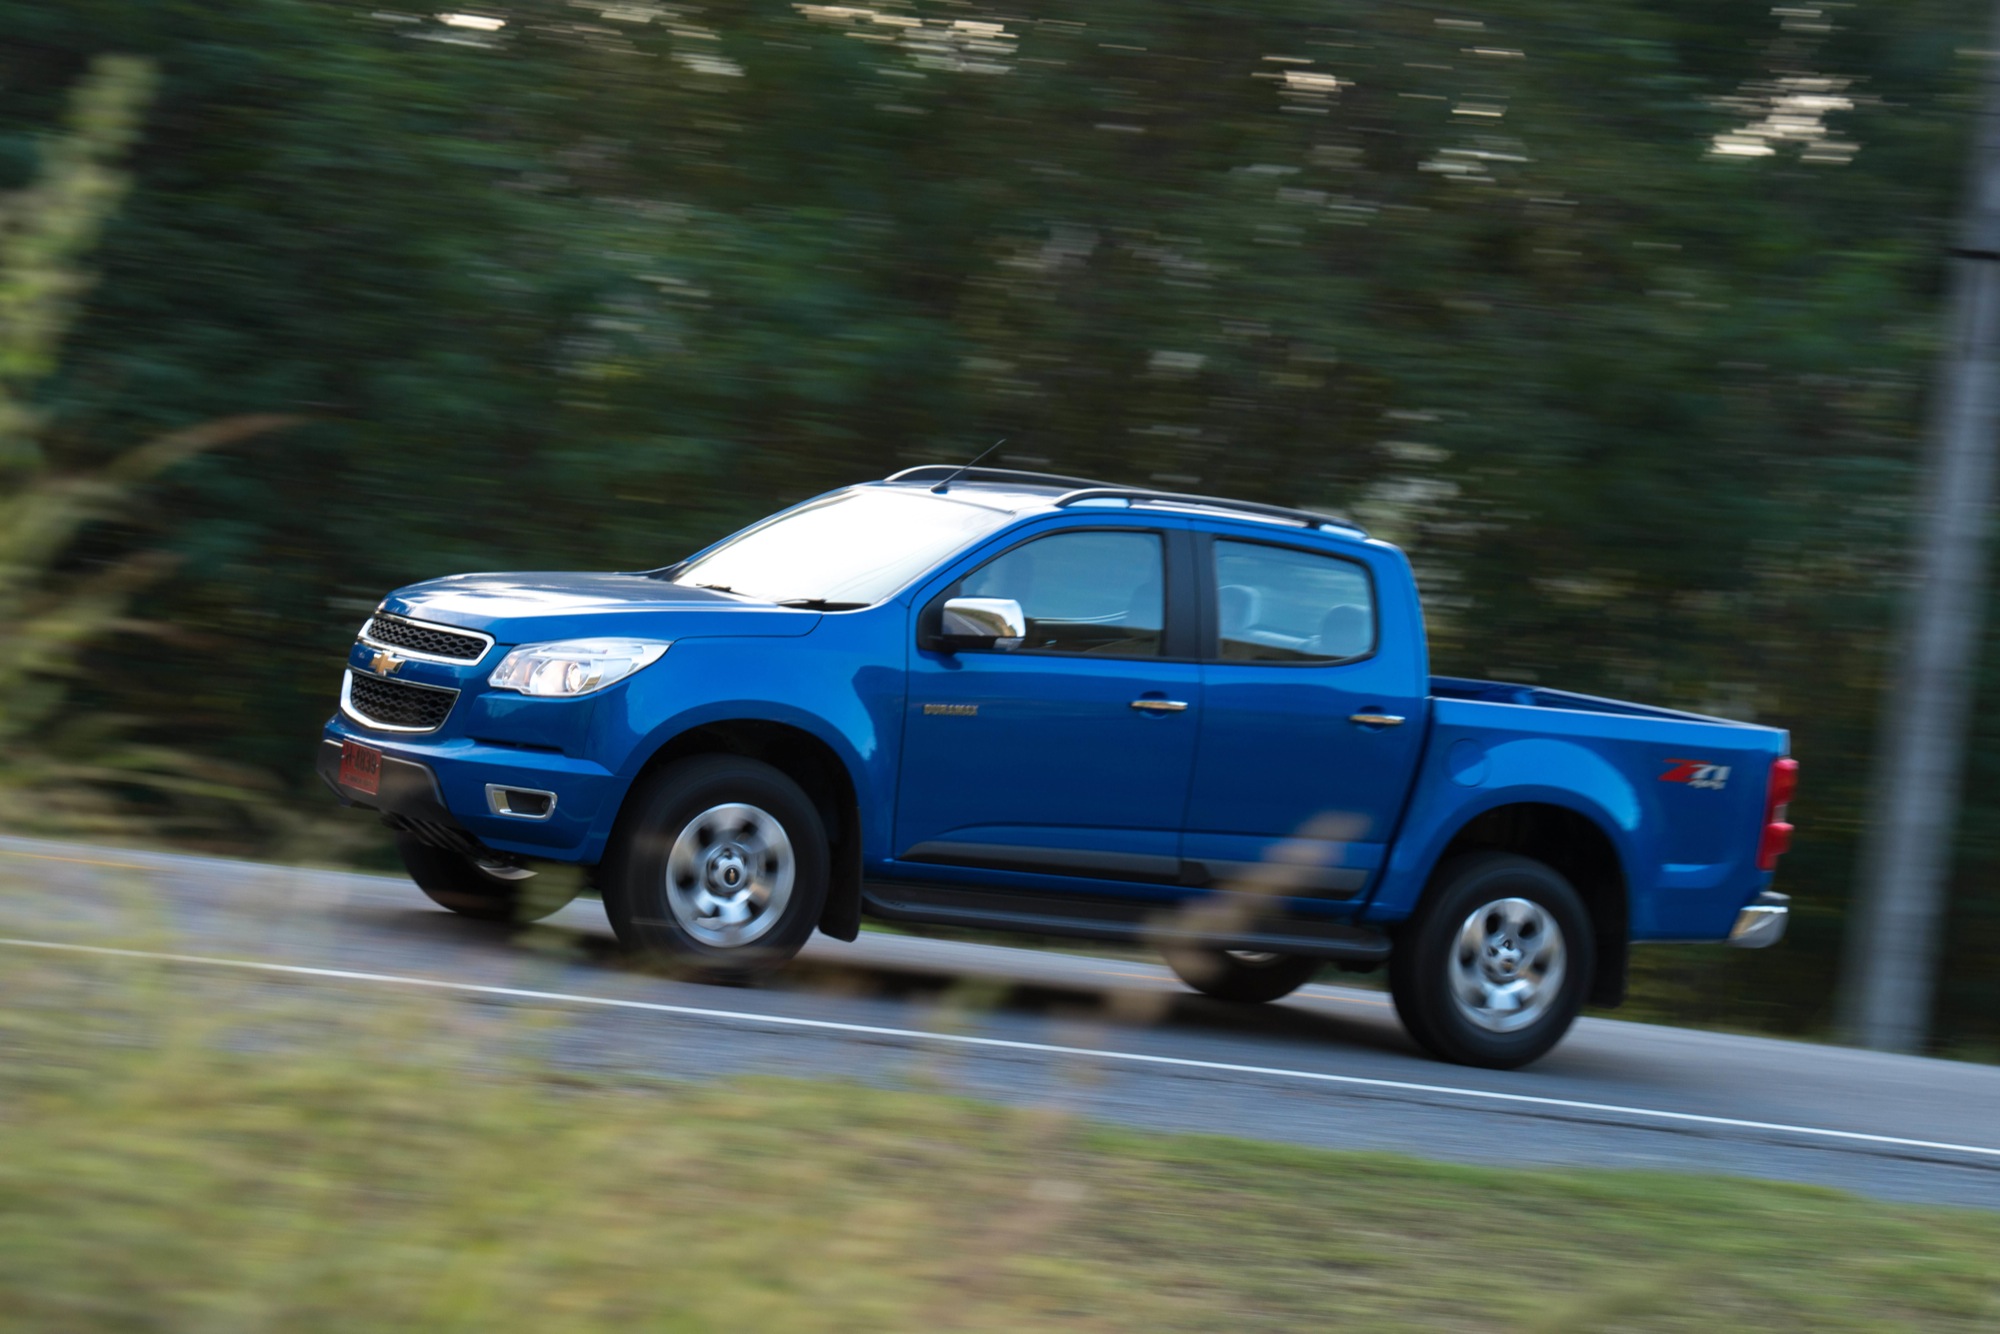 2014 Chevy Colorado Info, Specs, Price, Pictures, Wiki GM Authority